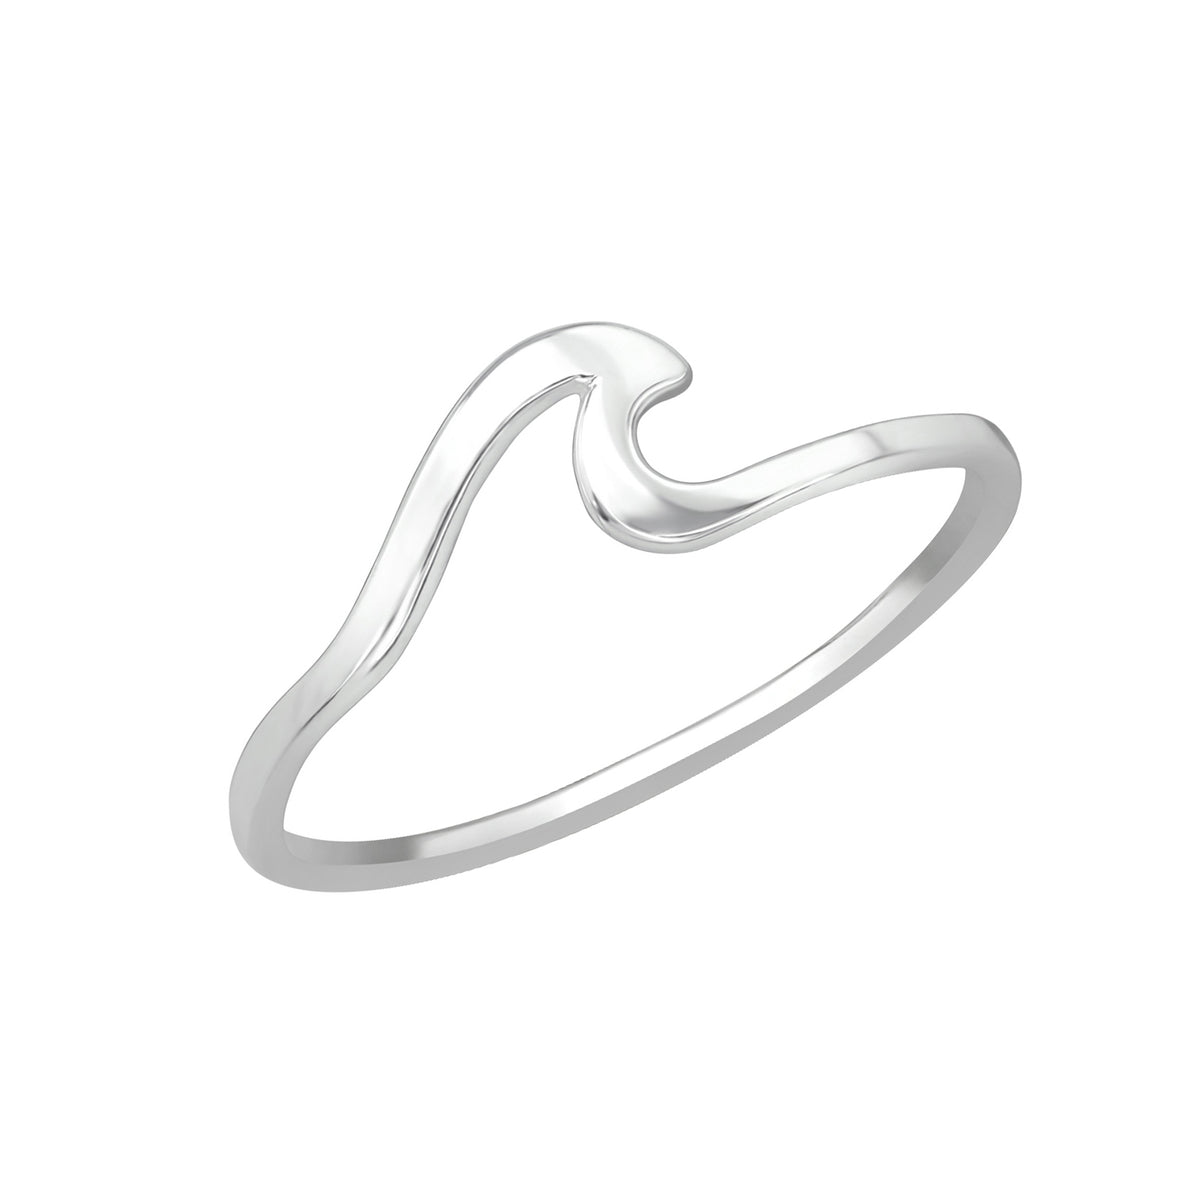 INEL SUMMER WAVE ARGINT 925 rings > silver ring > wave ring > summer ring > sea ring > gifts for her > gifts for girls > gifts for moms > gifts for best friend > birthday gift Maison la Stephanie   